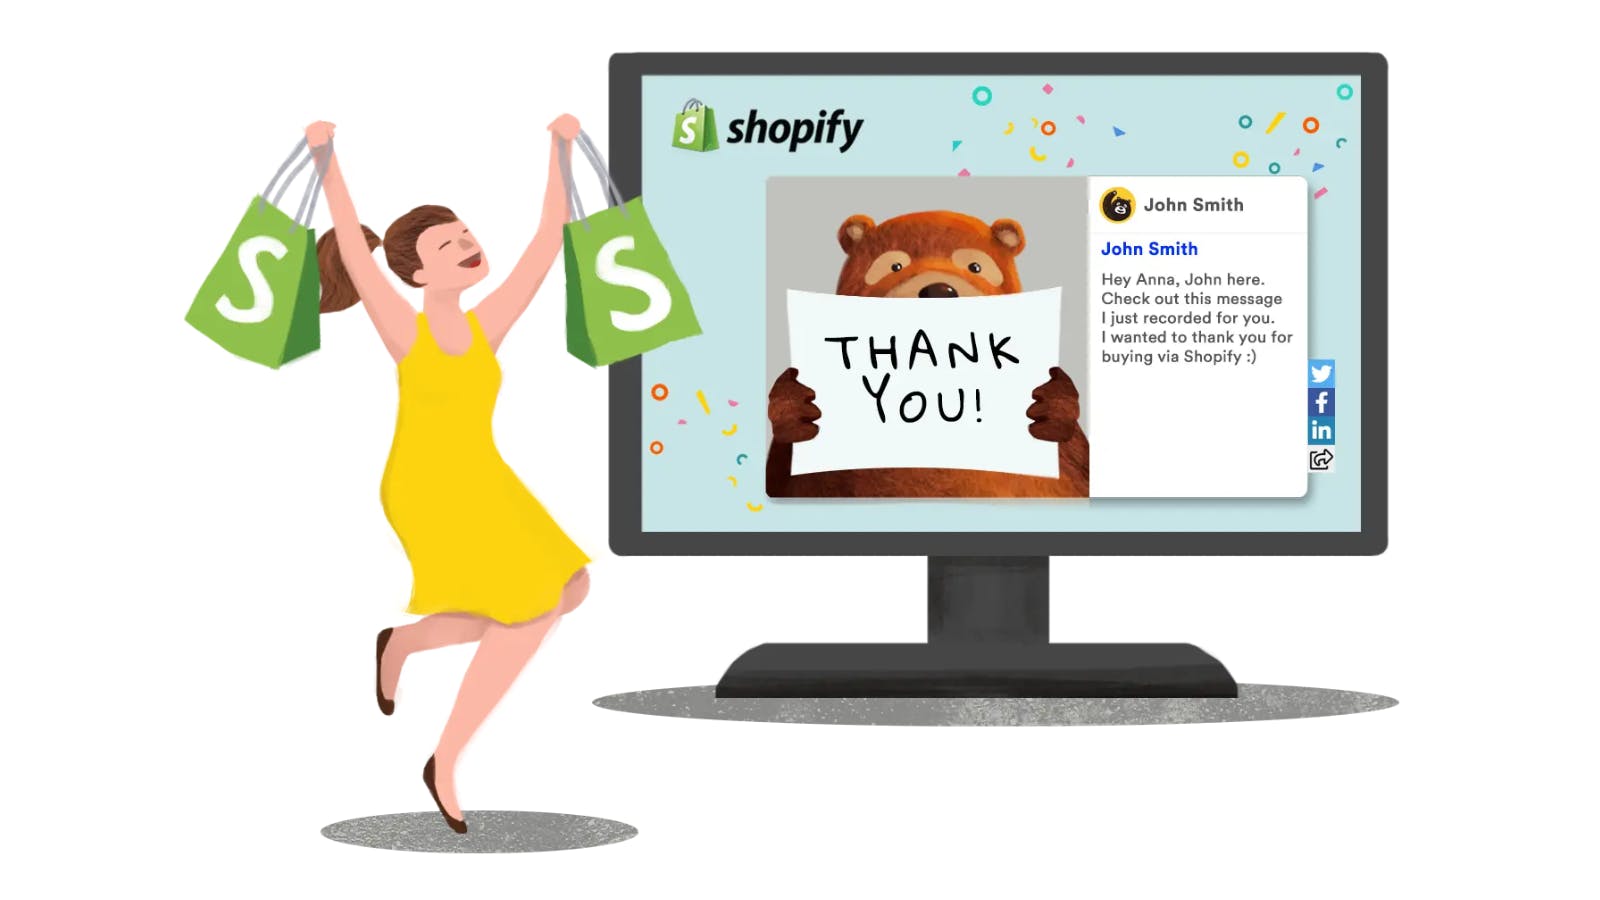 image showing a happy shopify customer receiving a thank you video